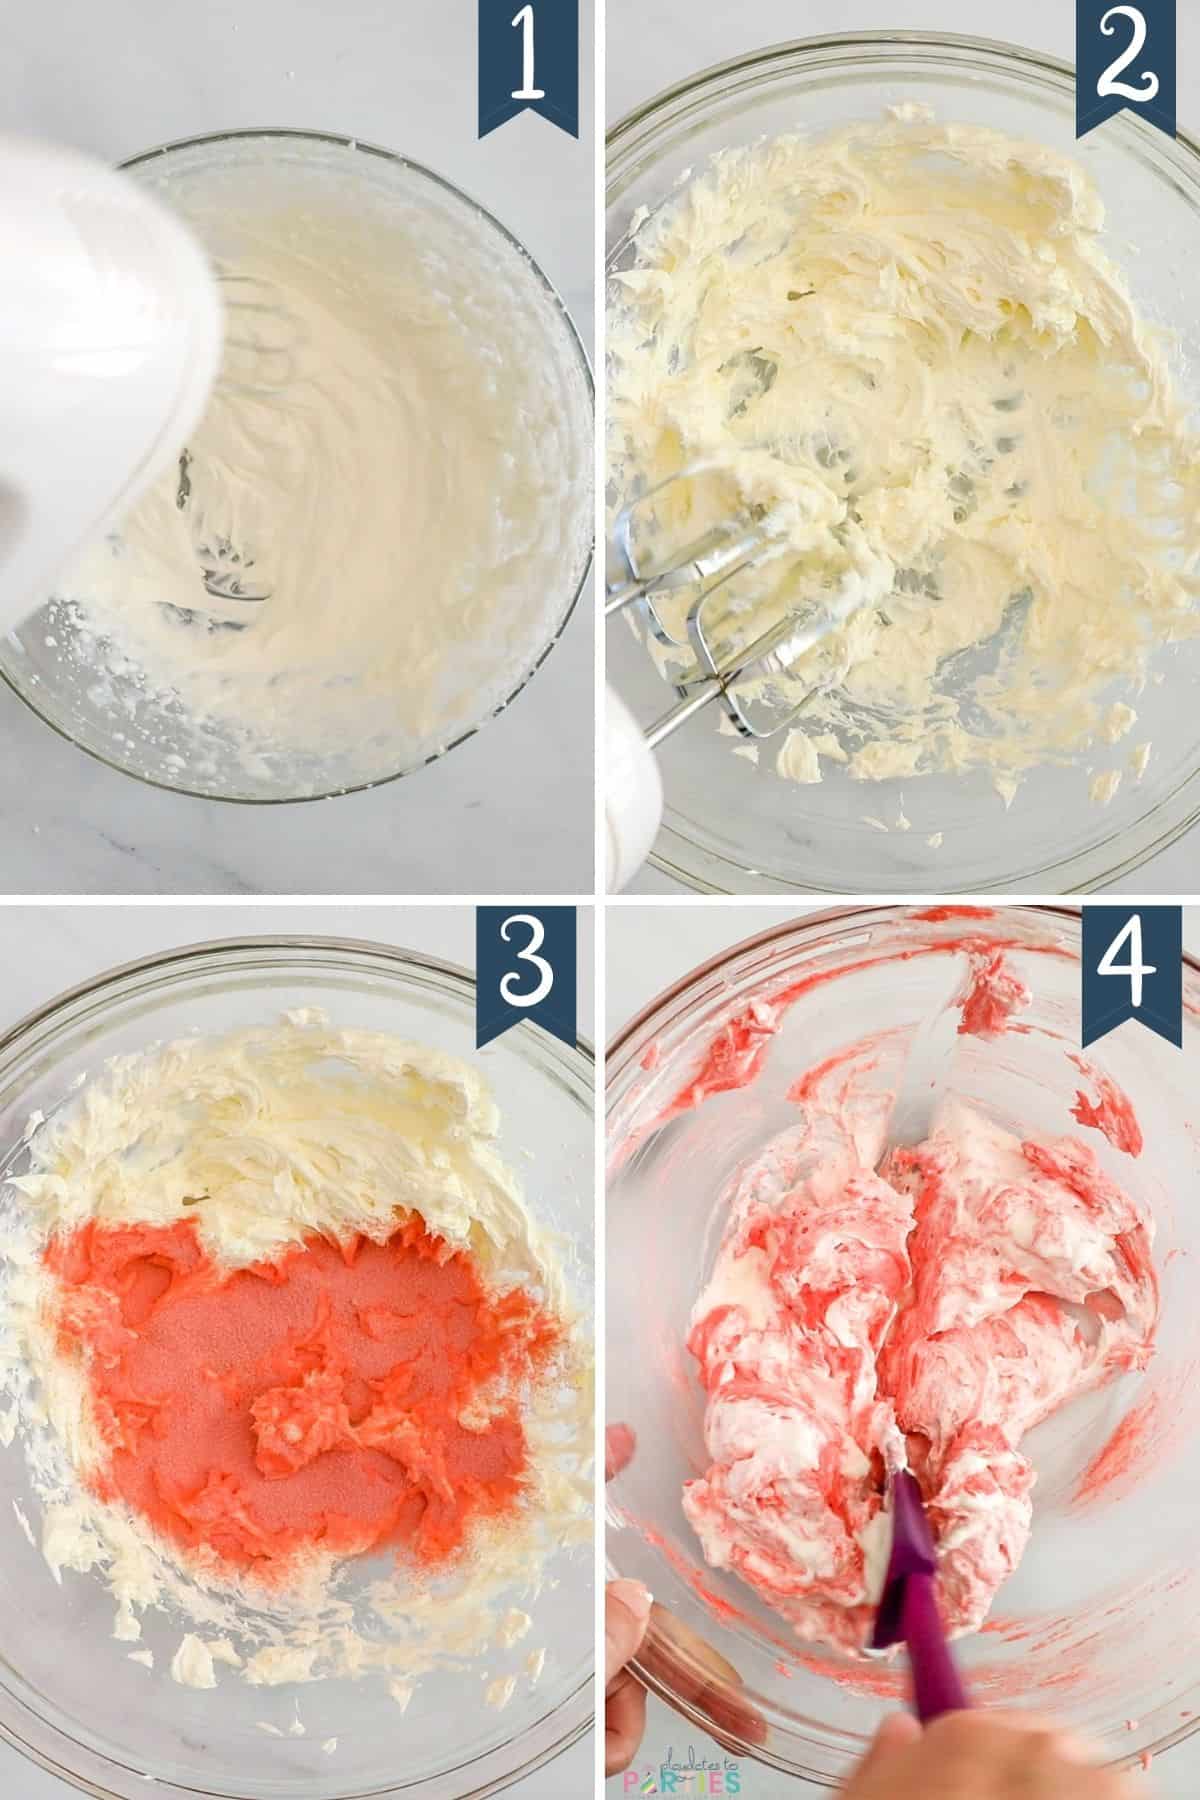 How to Make Strawberry Fruit Dip with Cream Cheese Steps 1-4.